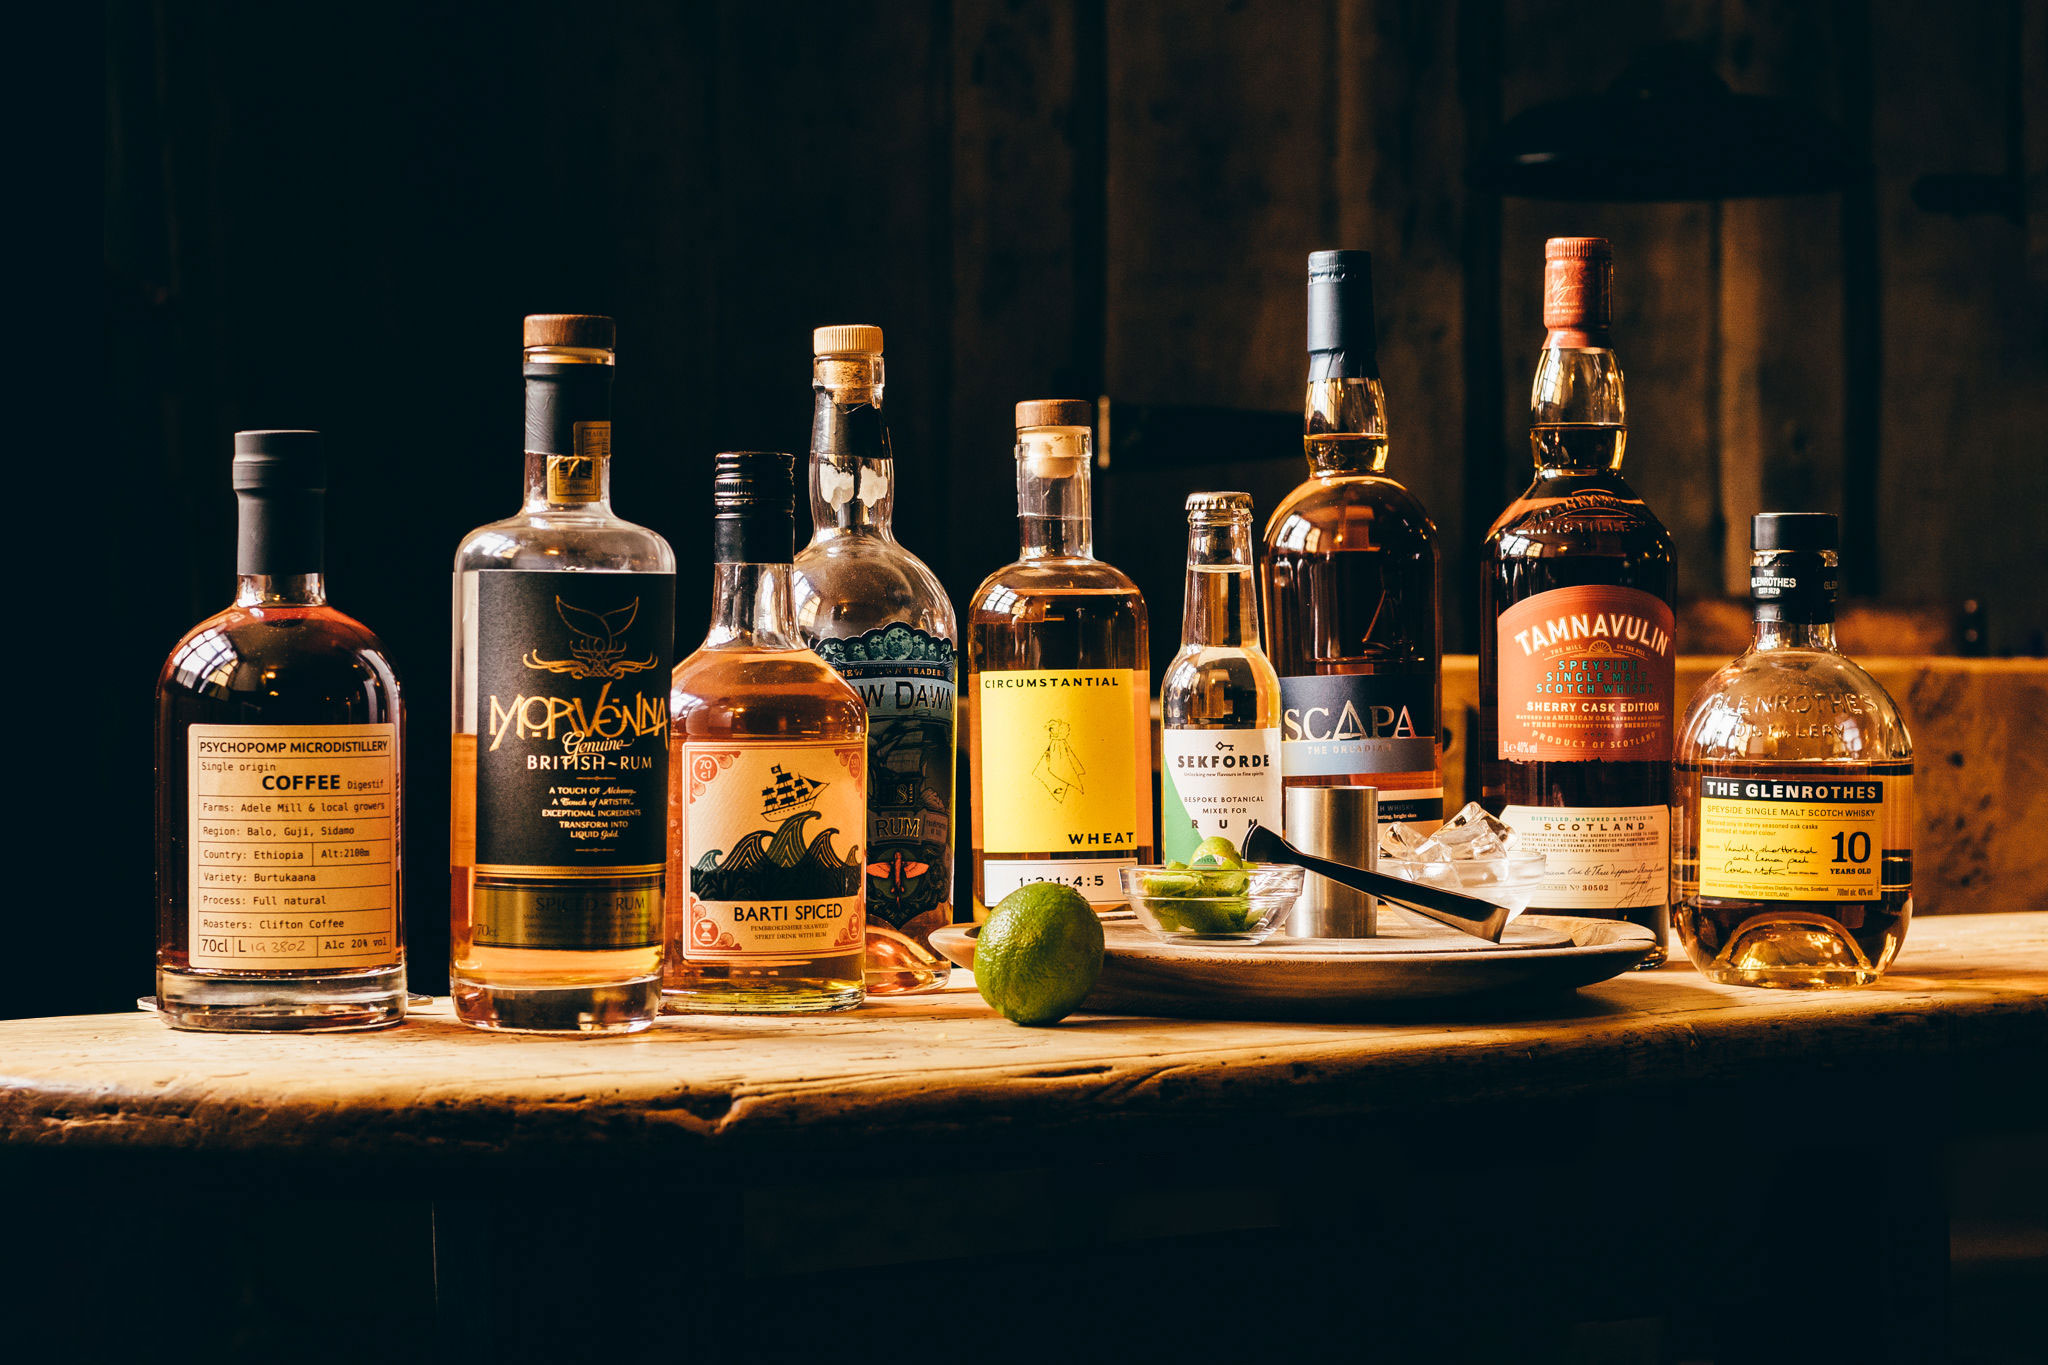 Whisky selection